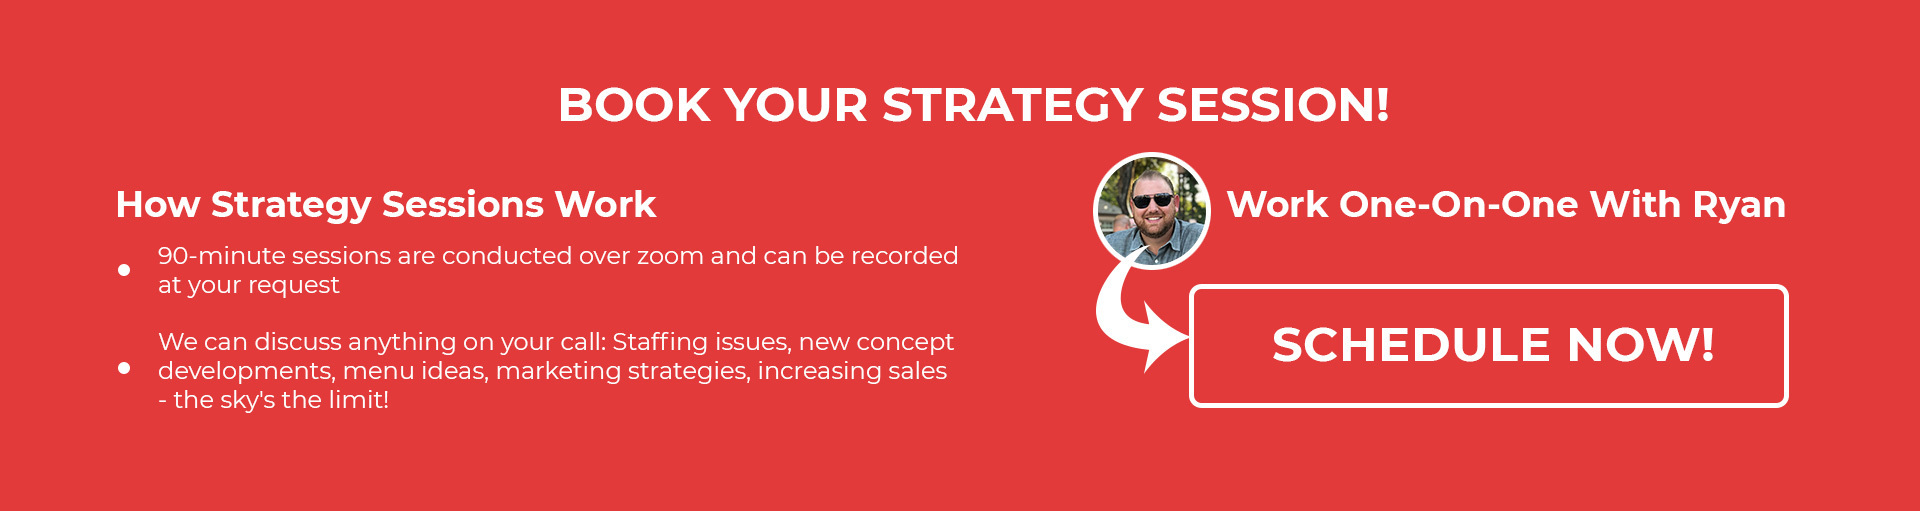 Book your strategy session with Ryan